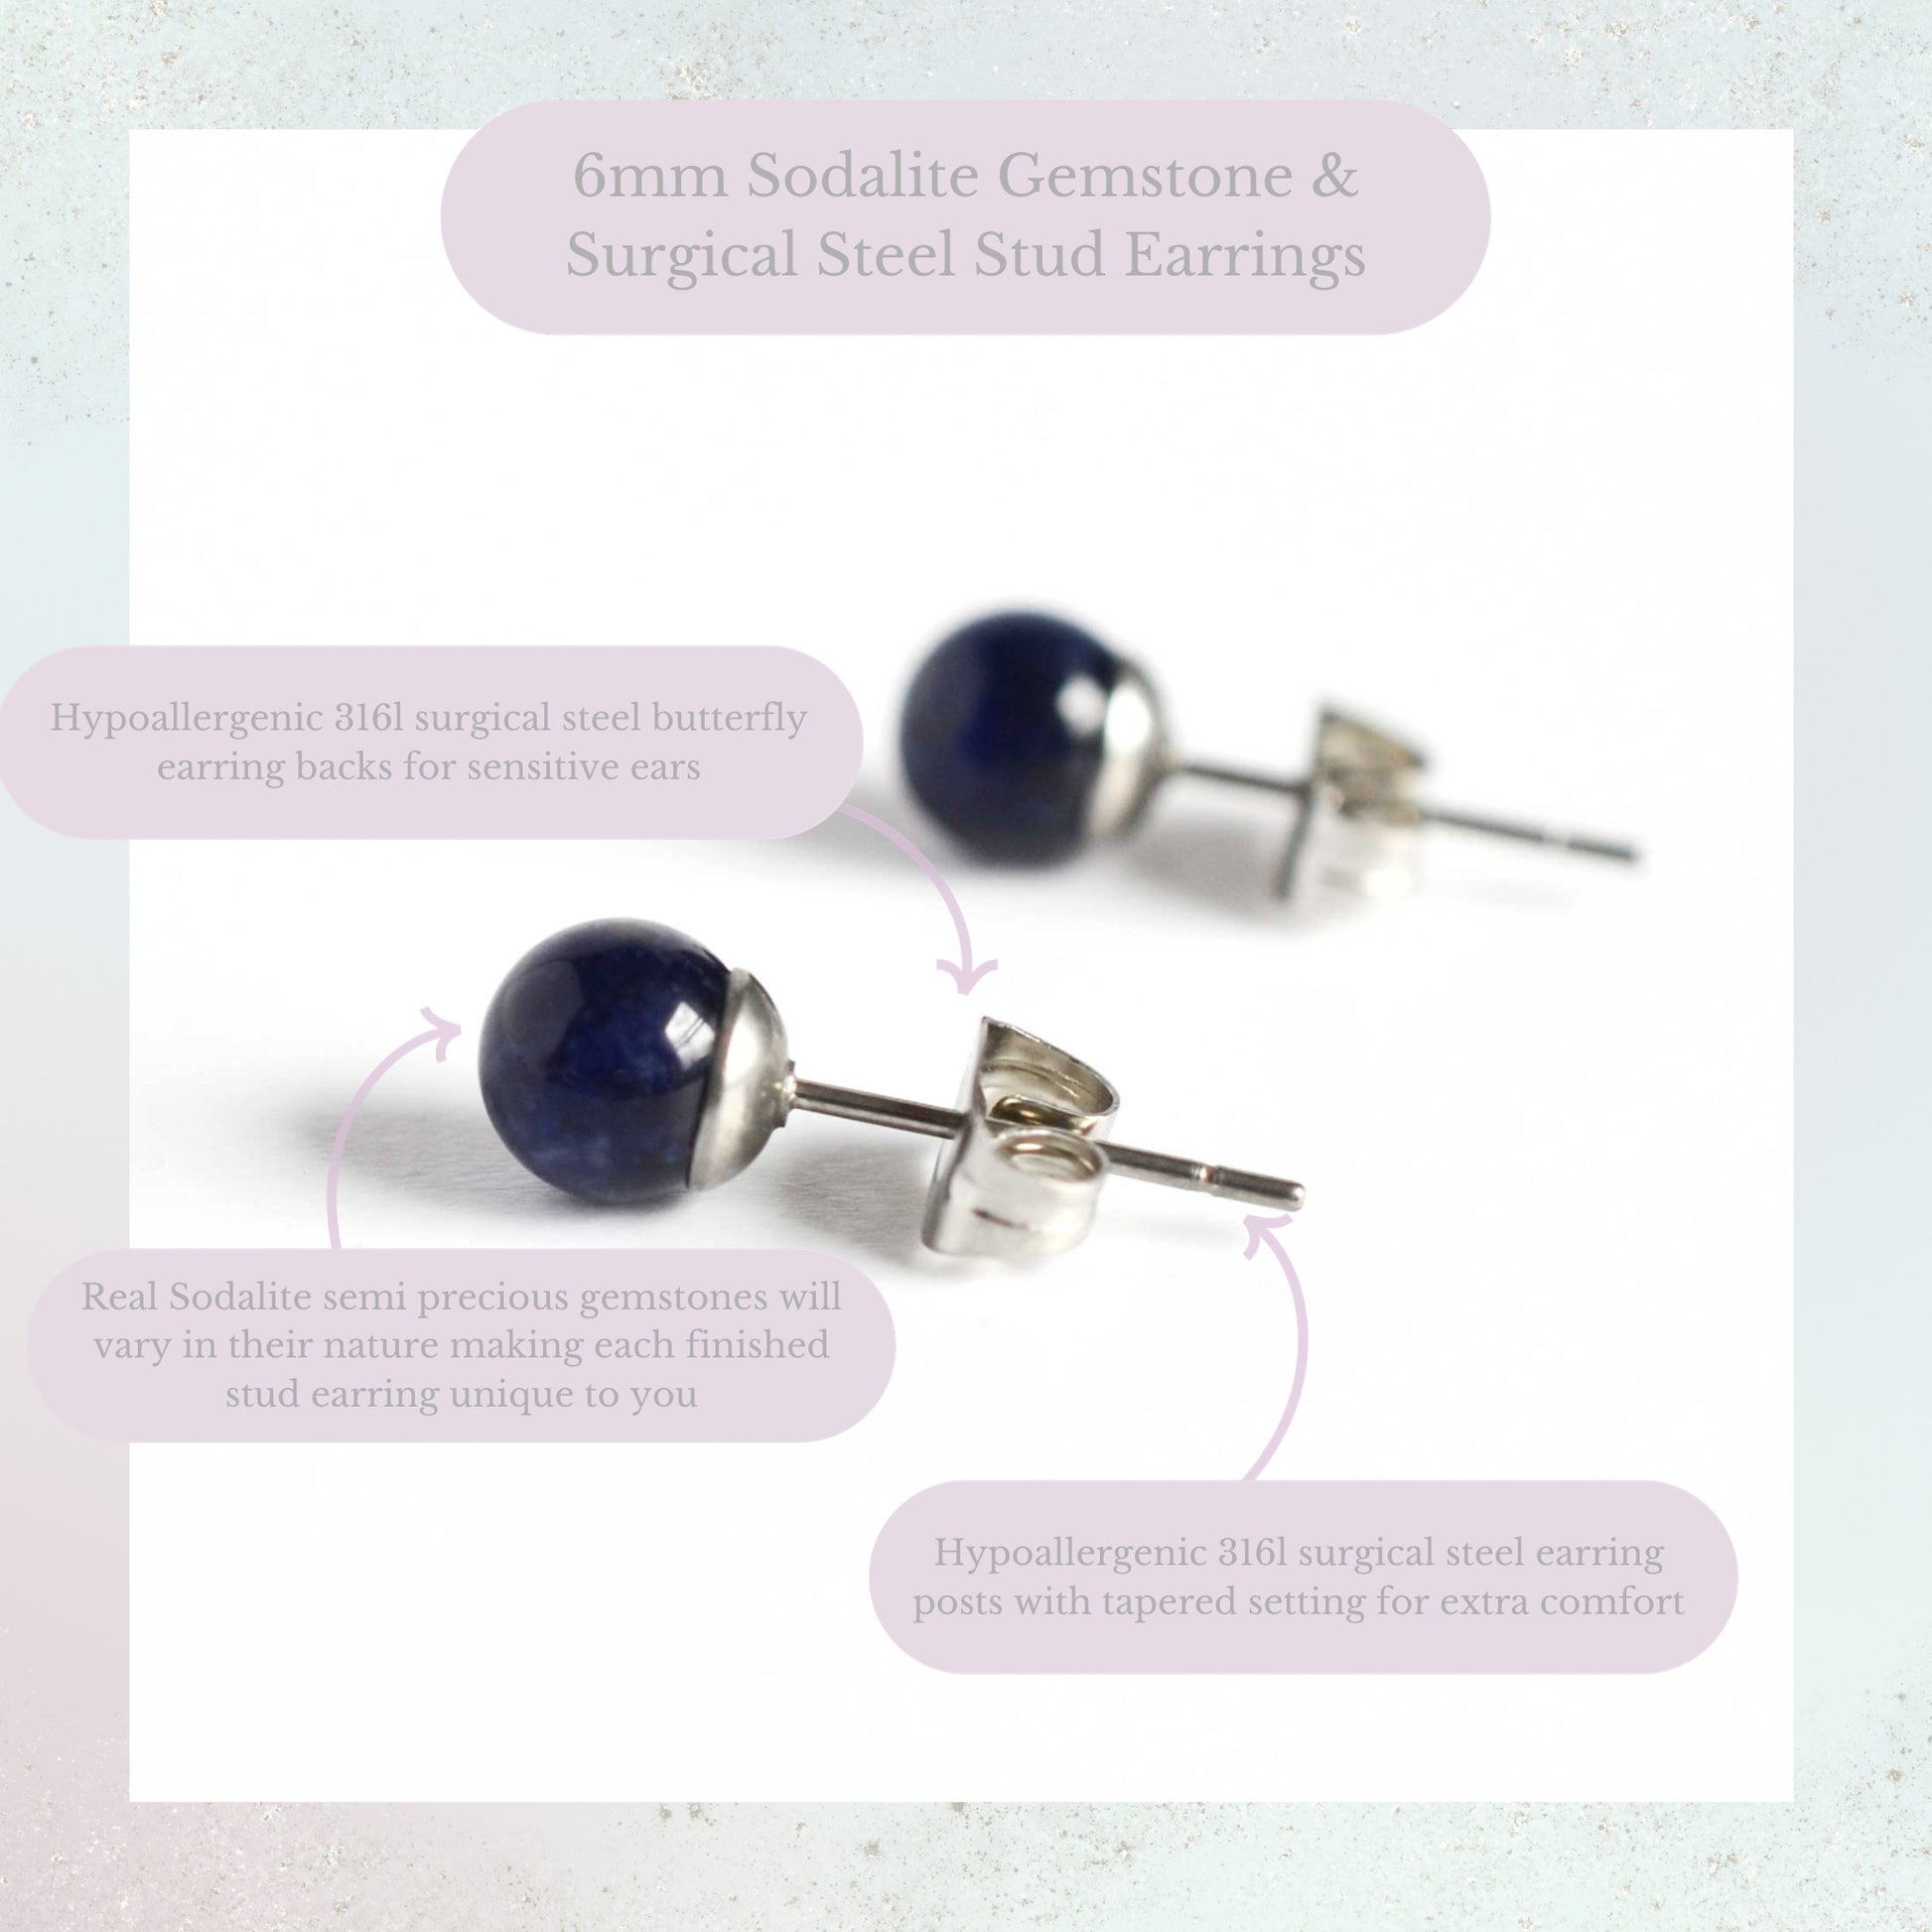 6mm Sodalite Gemstone & Surgical Steel Stud Earrings Product Information Graphic